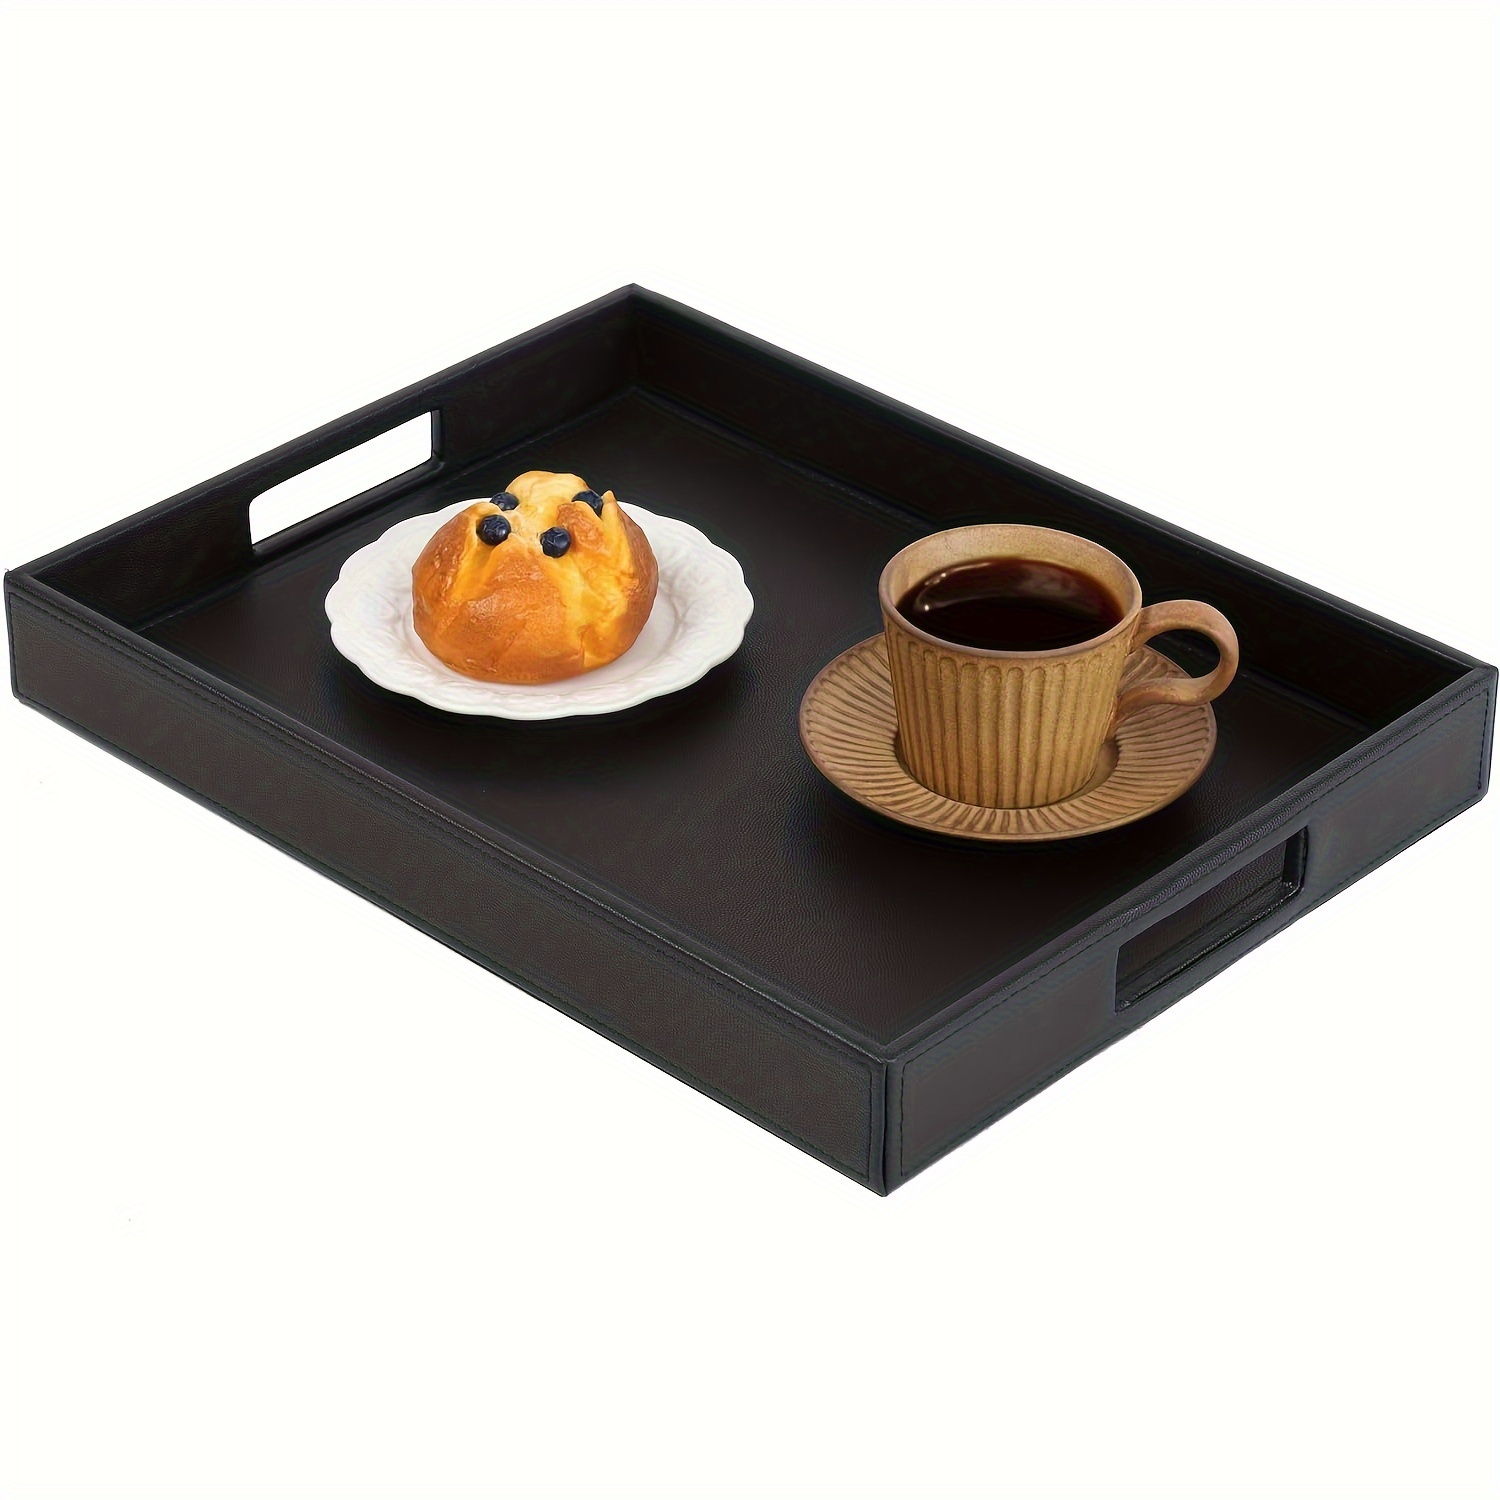 

Hofferruffer Rectangle Serving Tray With Hole Handles For Coffee Table, Breakfast, Tea, Food, Butler - Countertop, Kitchen, Vanity Serve Tray, 16.2 X 12.2 X 2 Inches, Faux Leather Tray (black)